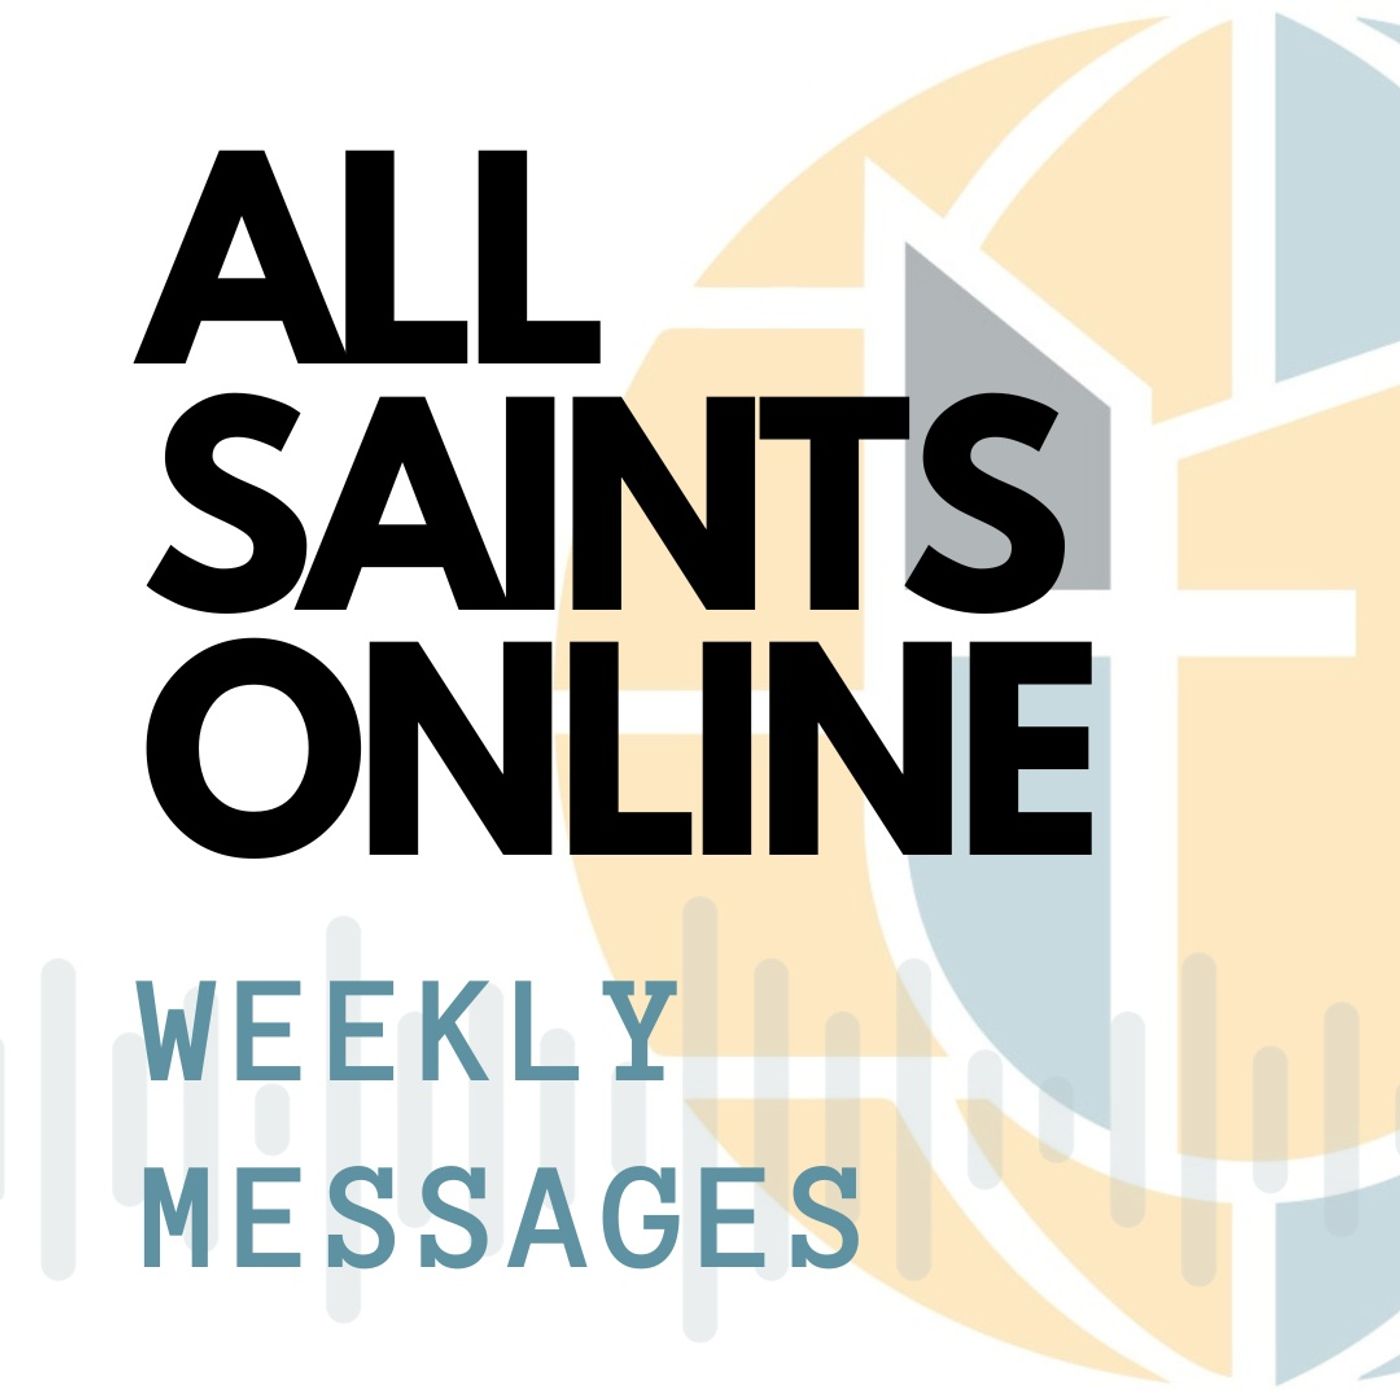 All Saints Online Weekly Messages